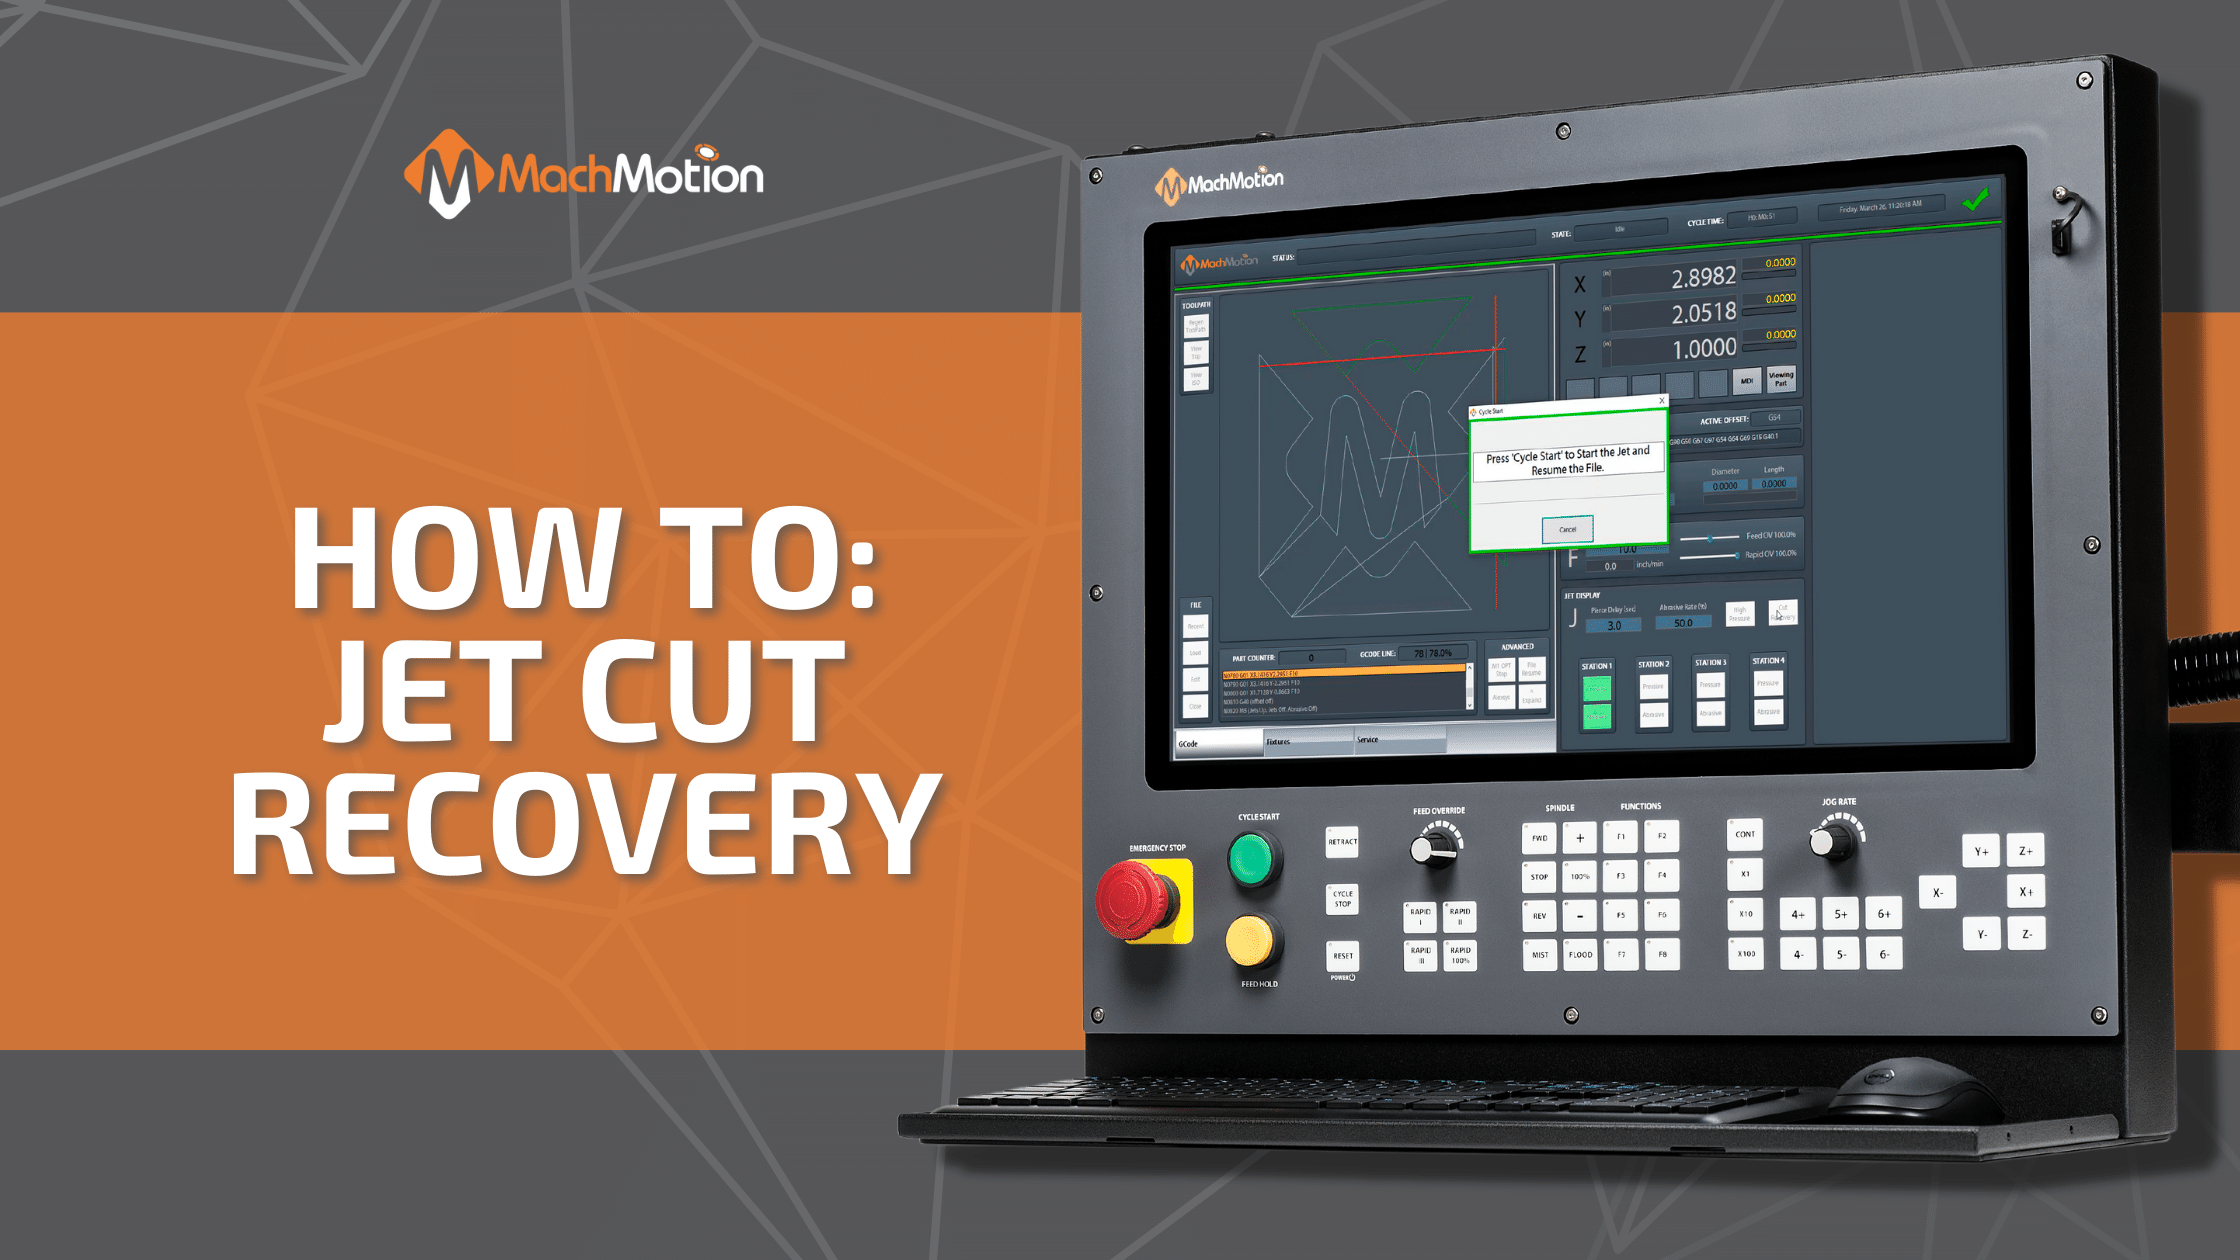 Jet Cut Recovery On A MachMotion Control